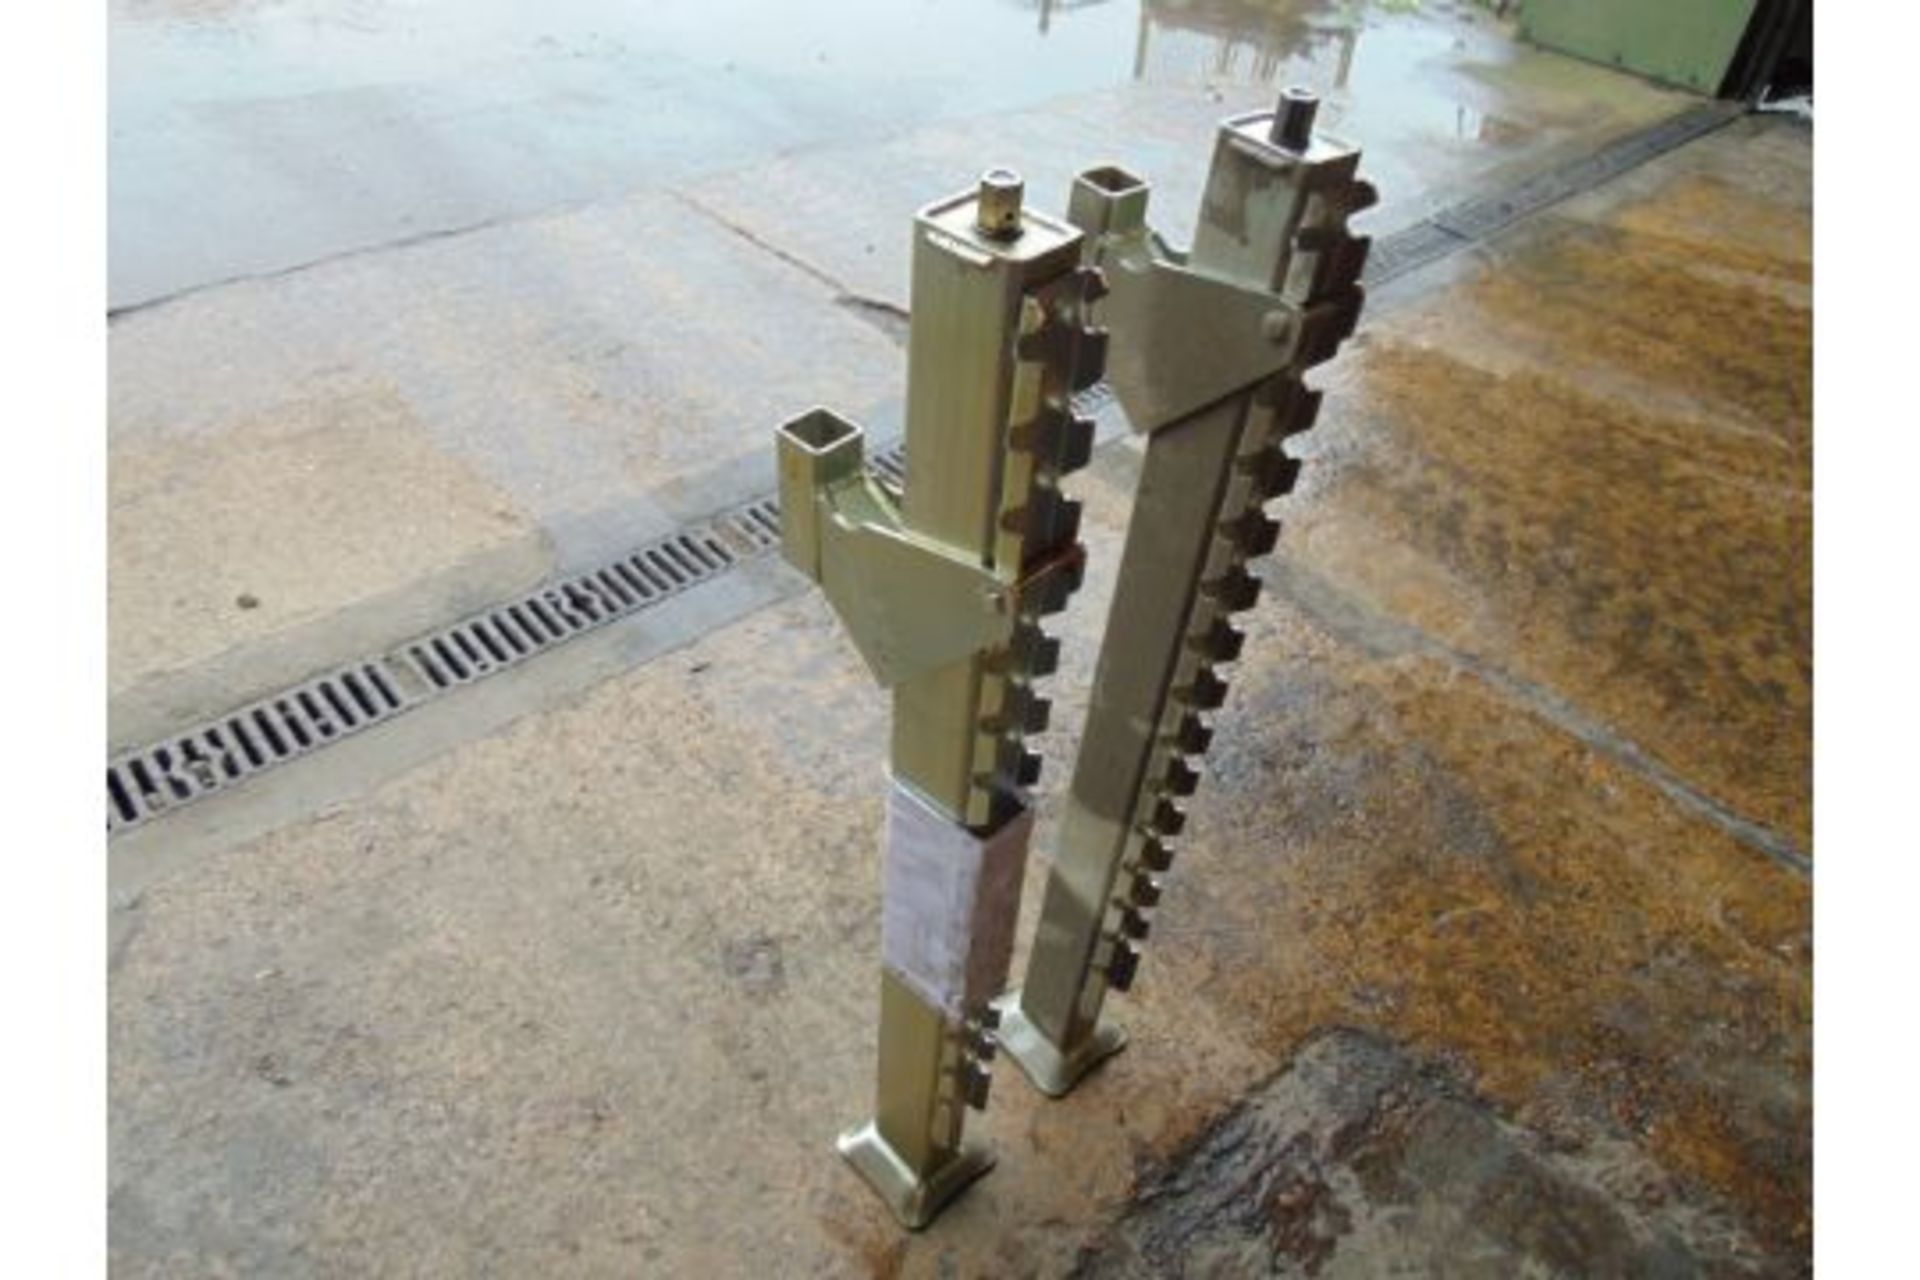 2 x New Unissued 2400kgs High Lift Screw Jacks for 4x4's etc 90cms as shown - Image 3 of 5